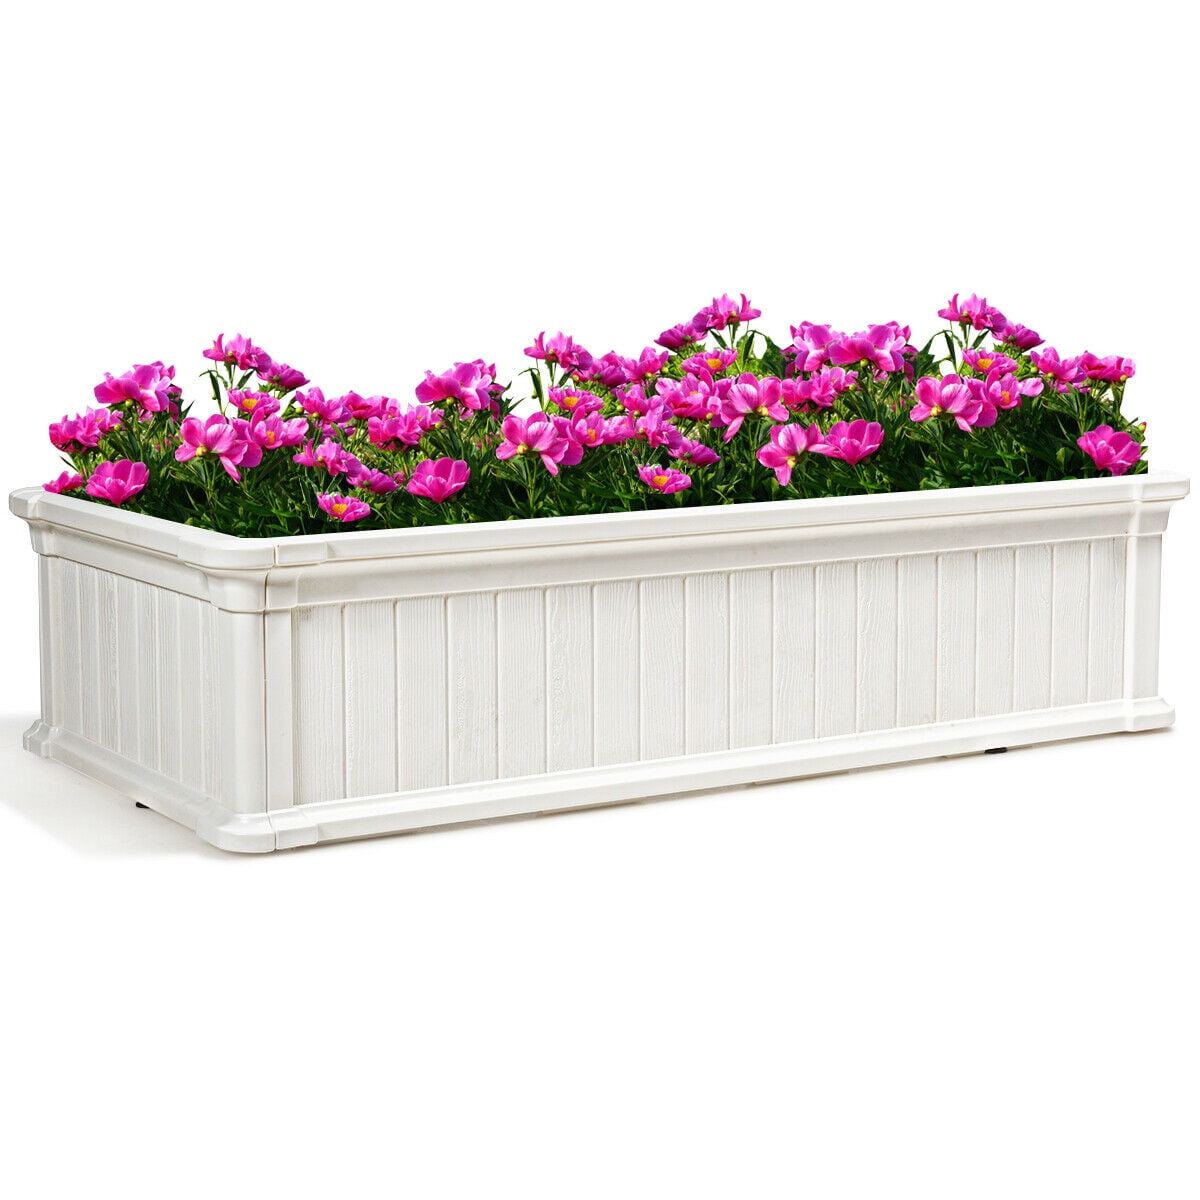 Gymax 48''x24'' Raised Garden Bed Rectangle Plant Box Planter Flower ...